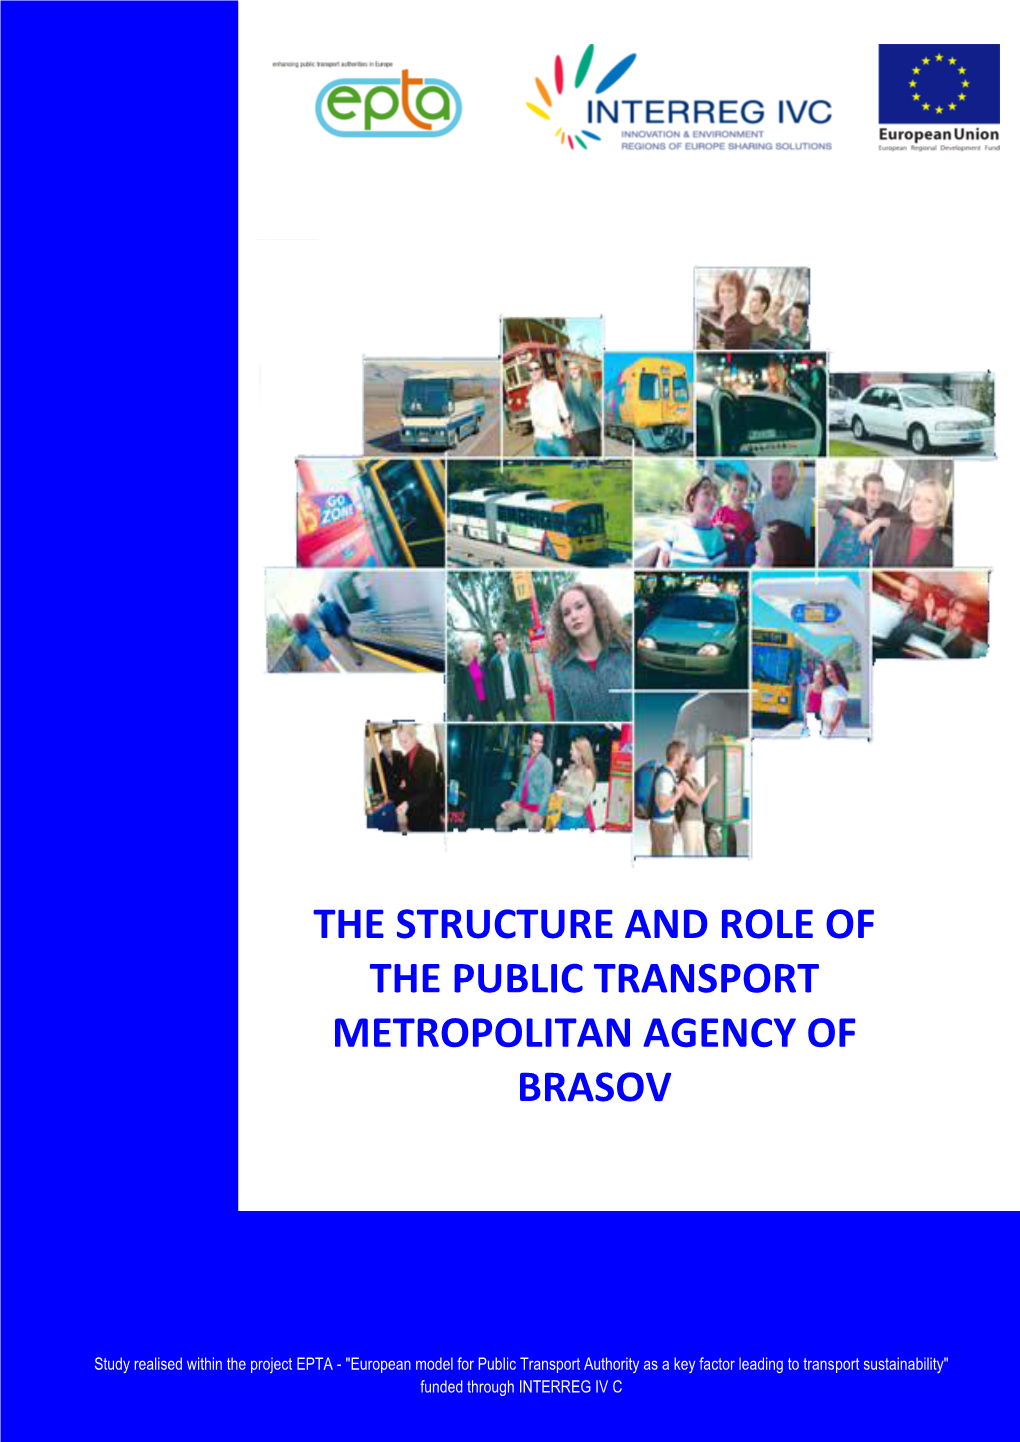 The Structure and Role of the Public Transport Metropolitan Agency of Brasov